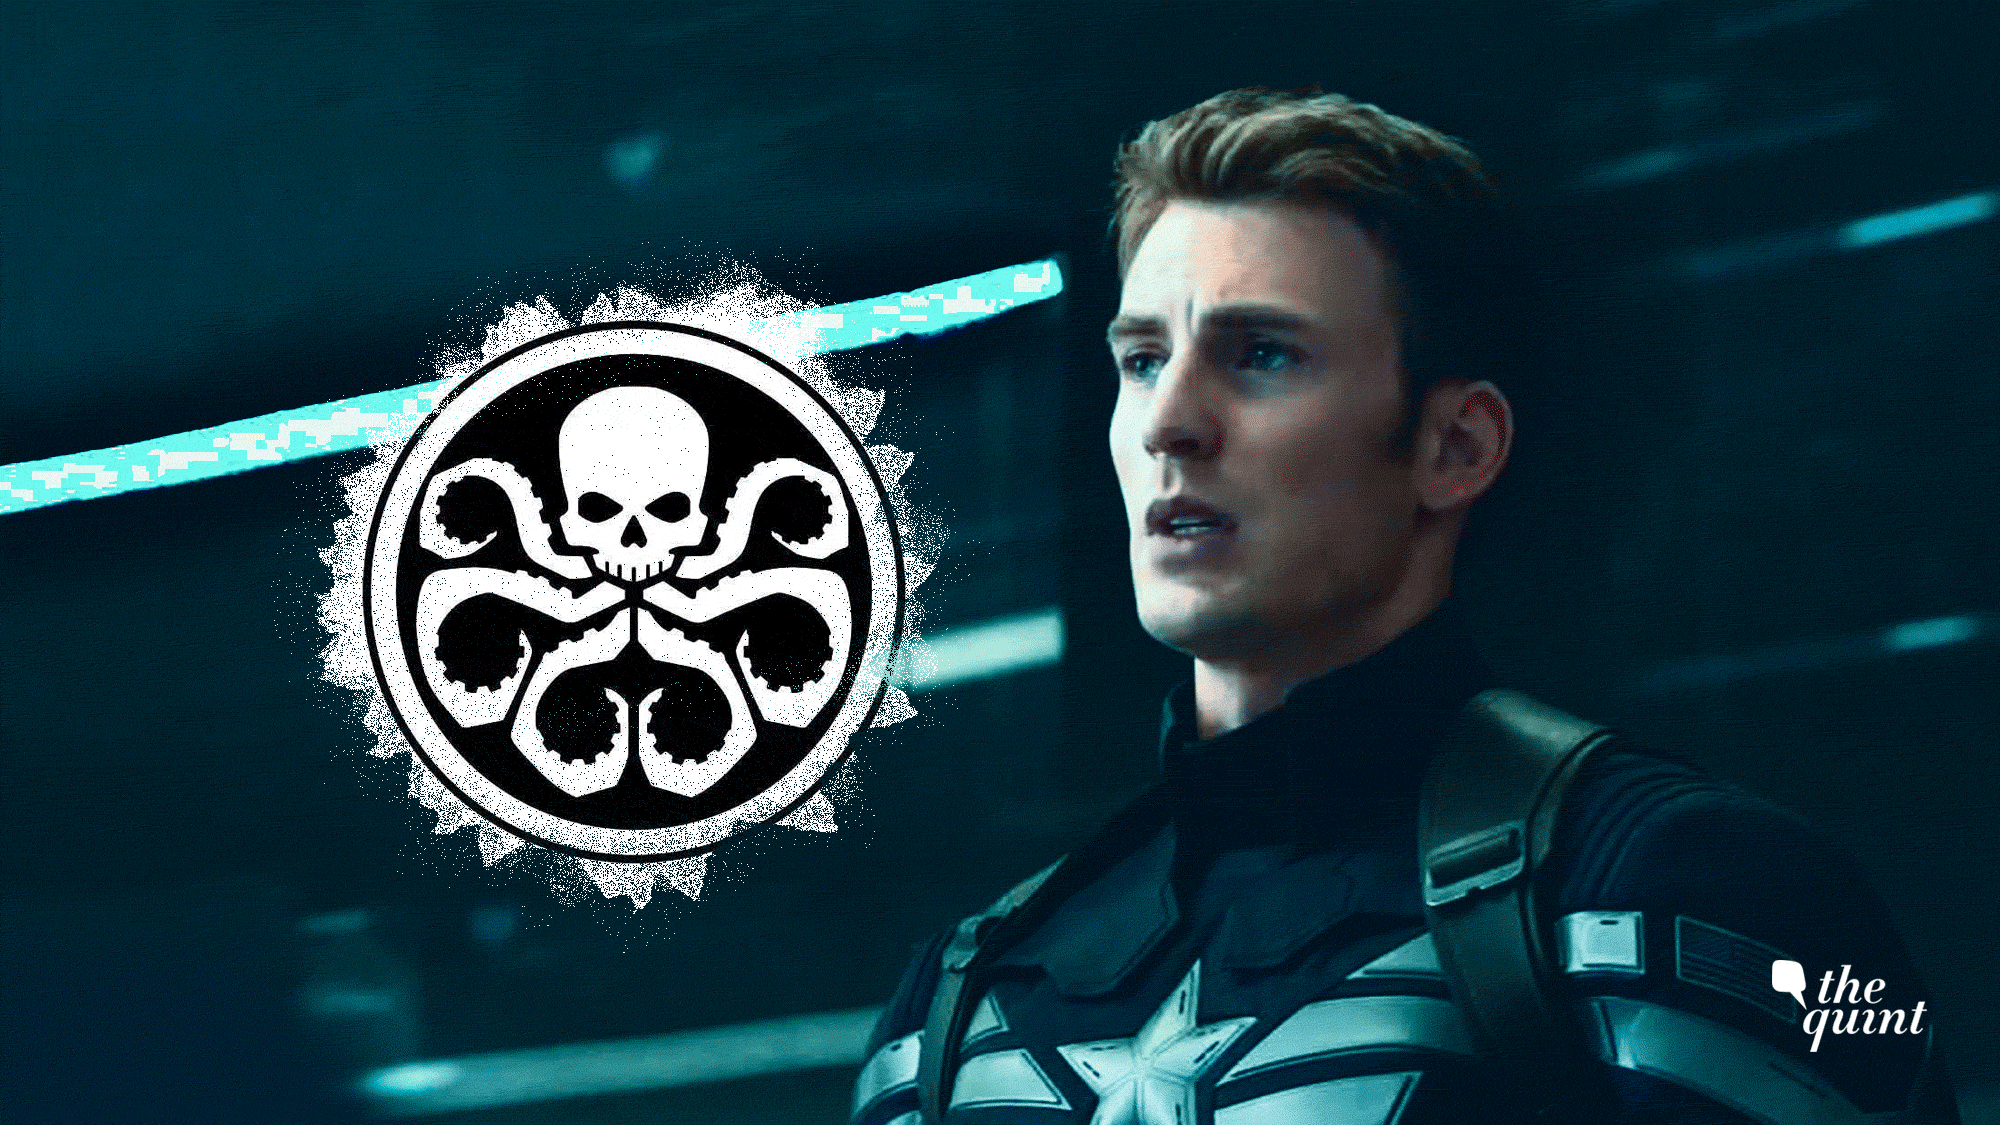 Captain America looks on in horror as the income tax department reveals itself to be the latest iteration of Hydra.